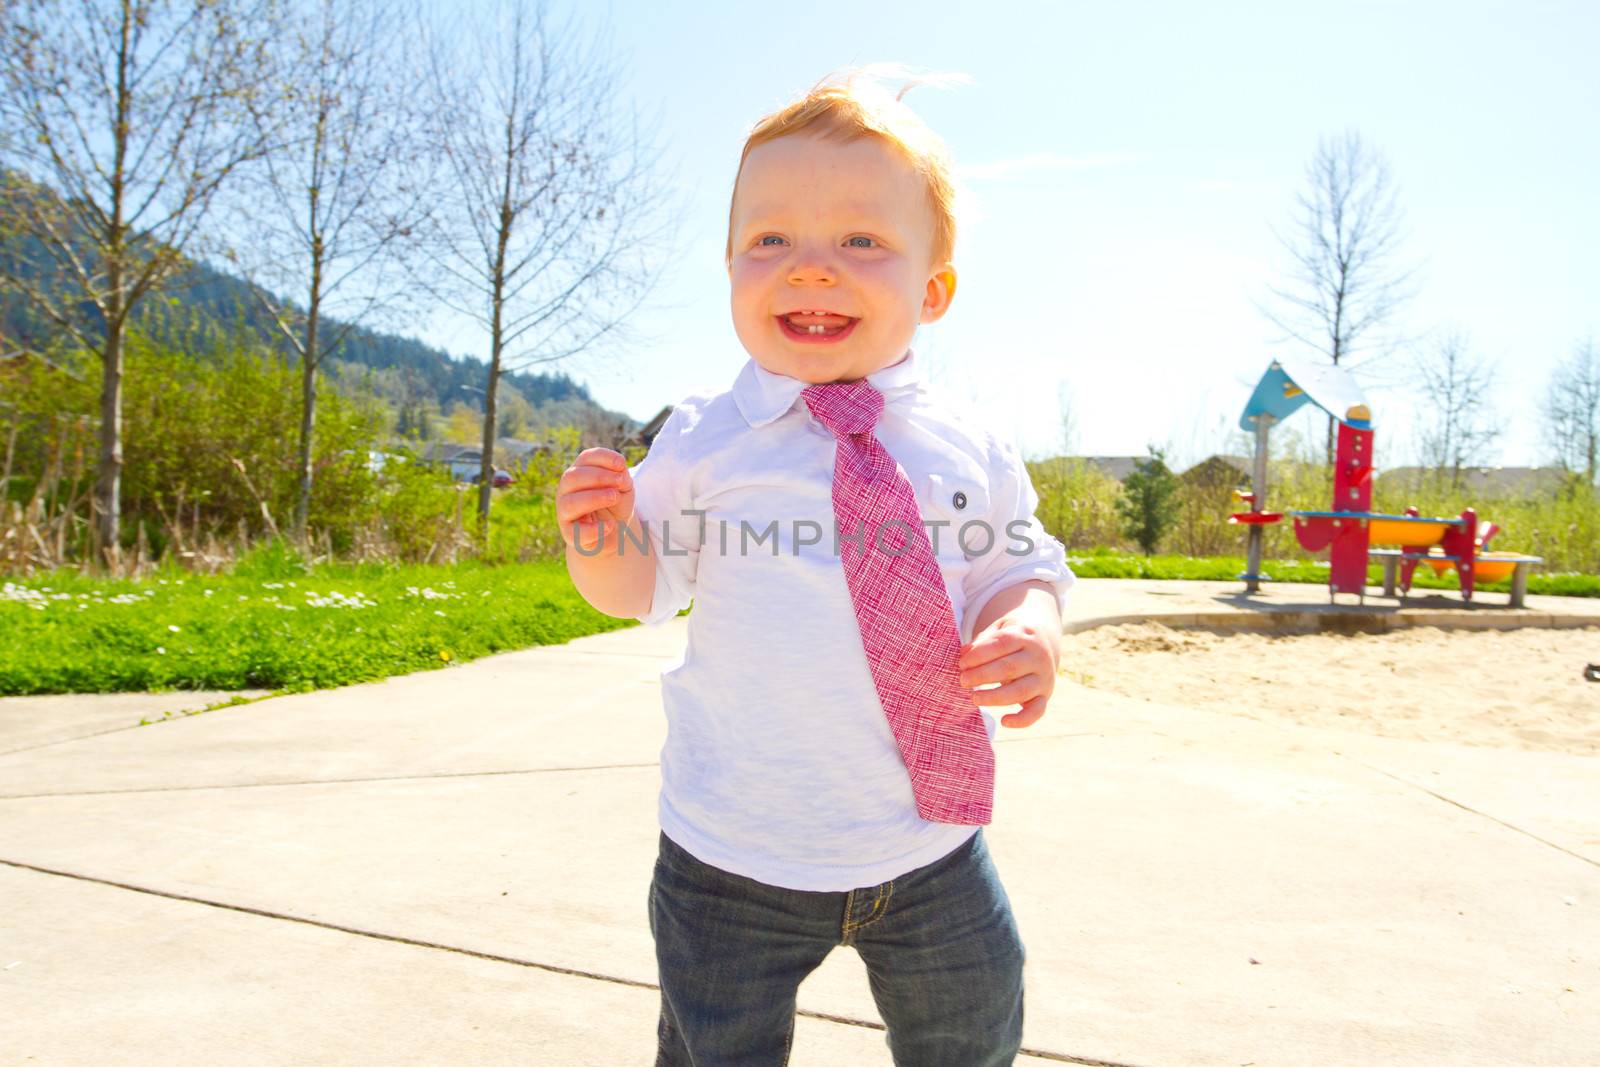 A baby boy plays at the park wearing his Sunday's best clothes including a tie around his neck.